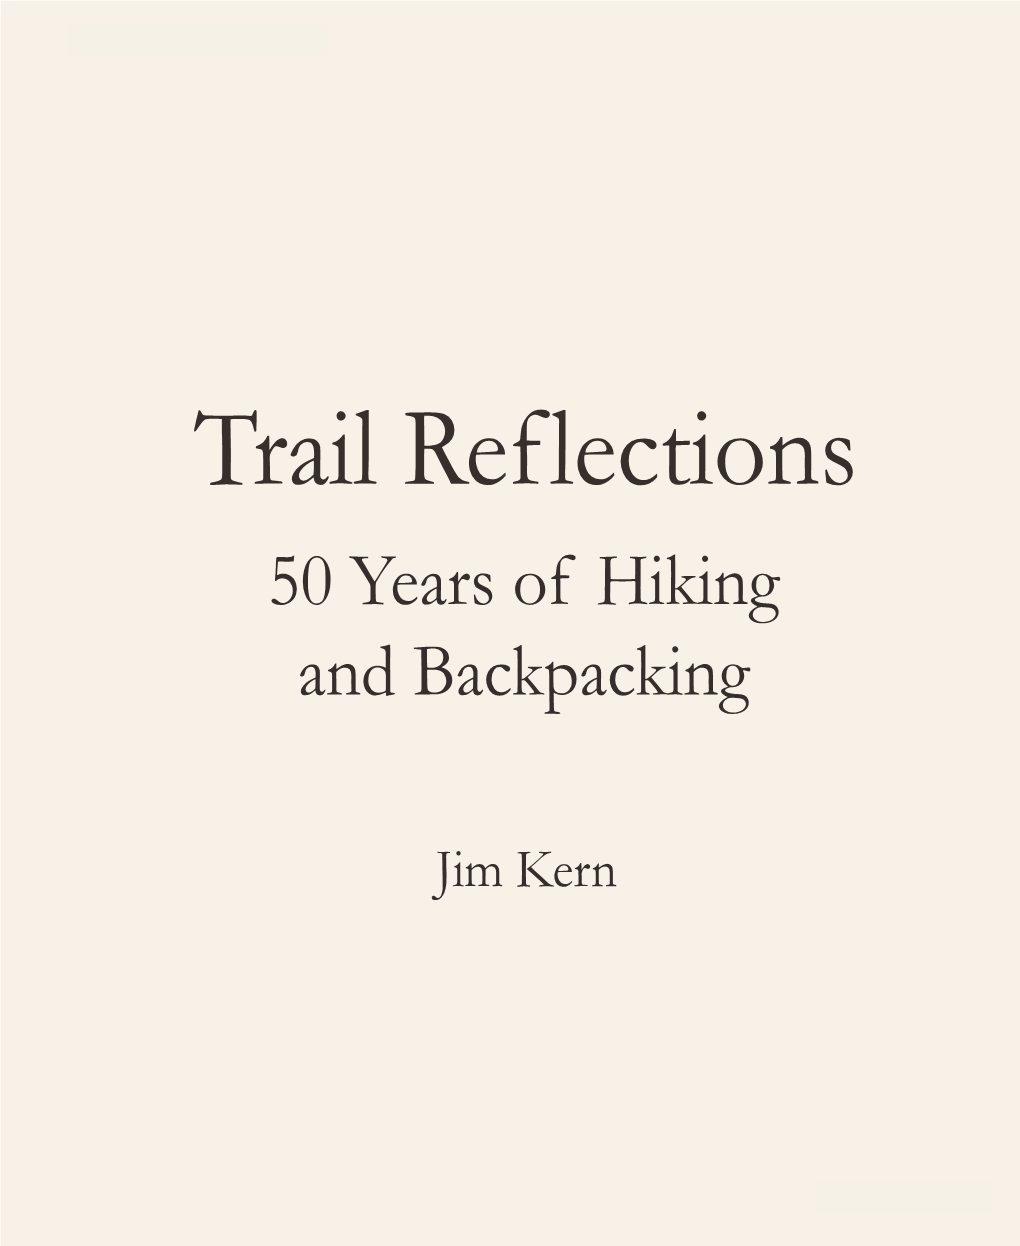 Trail Reflections 50 Years of Hiking and Backpacking